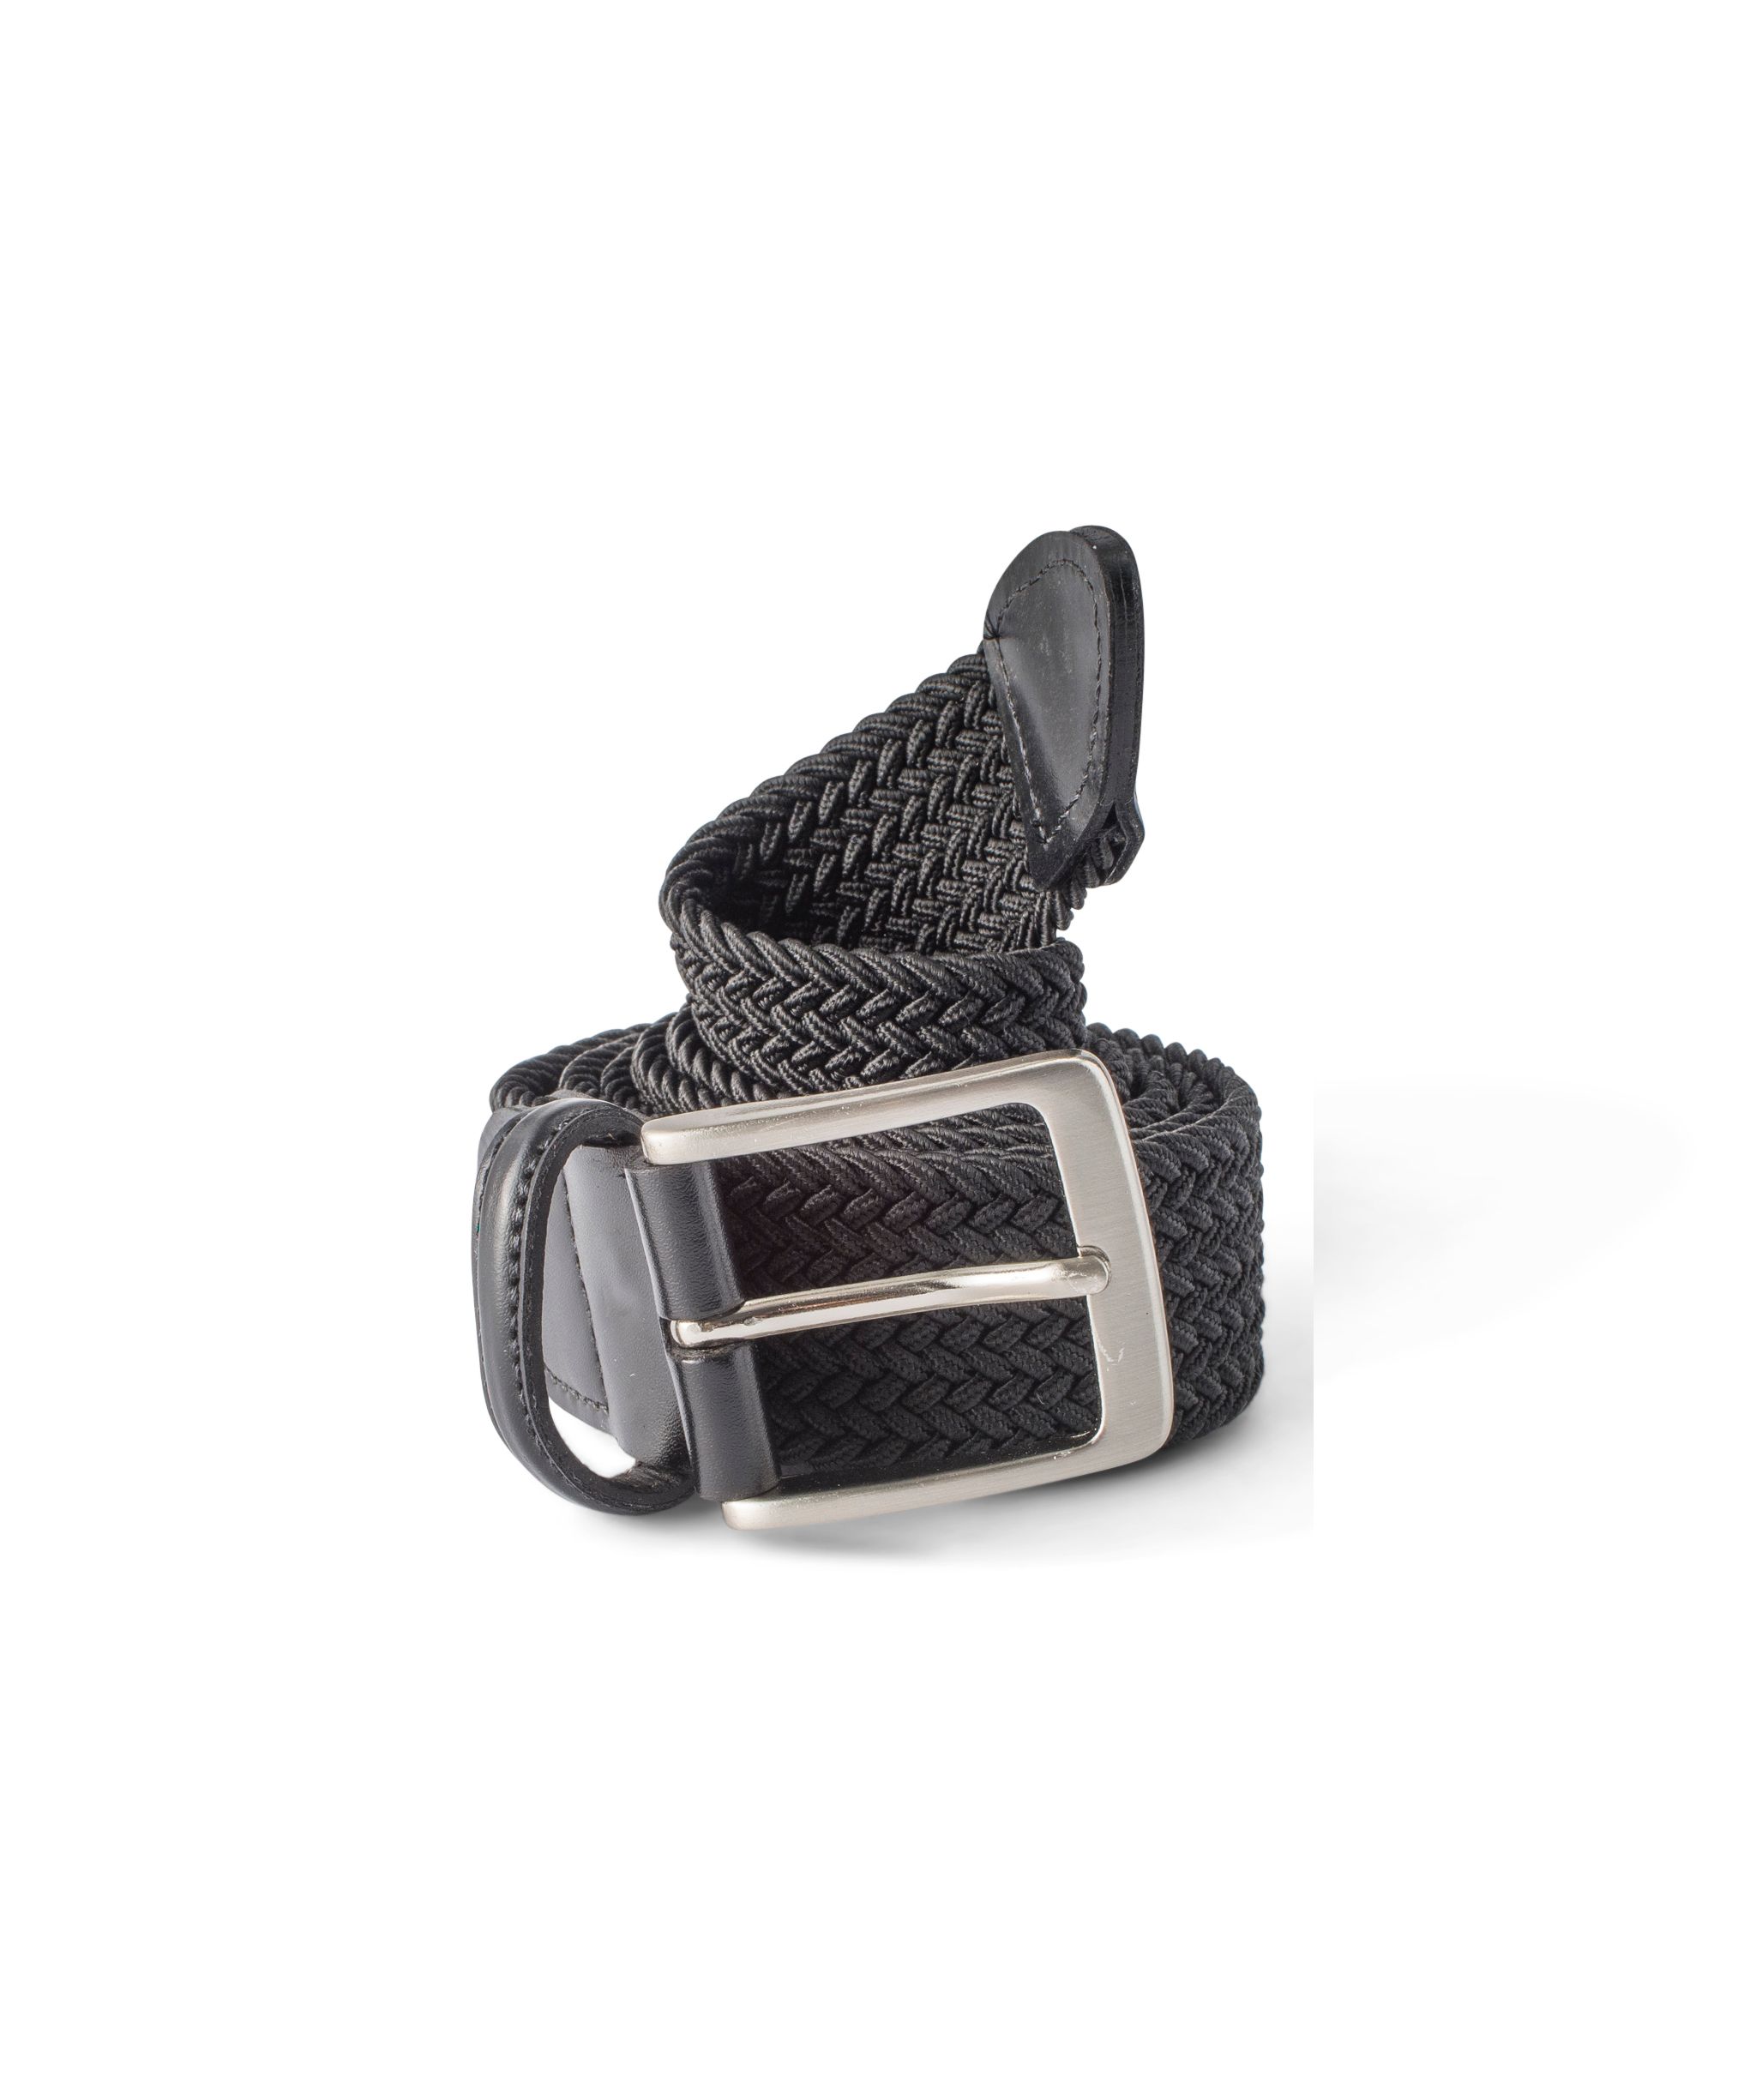 Mens All Products White Belts.